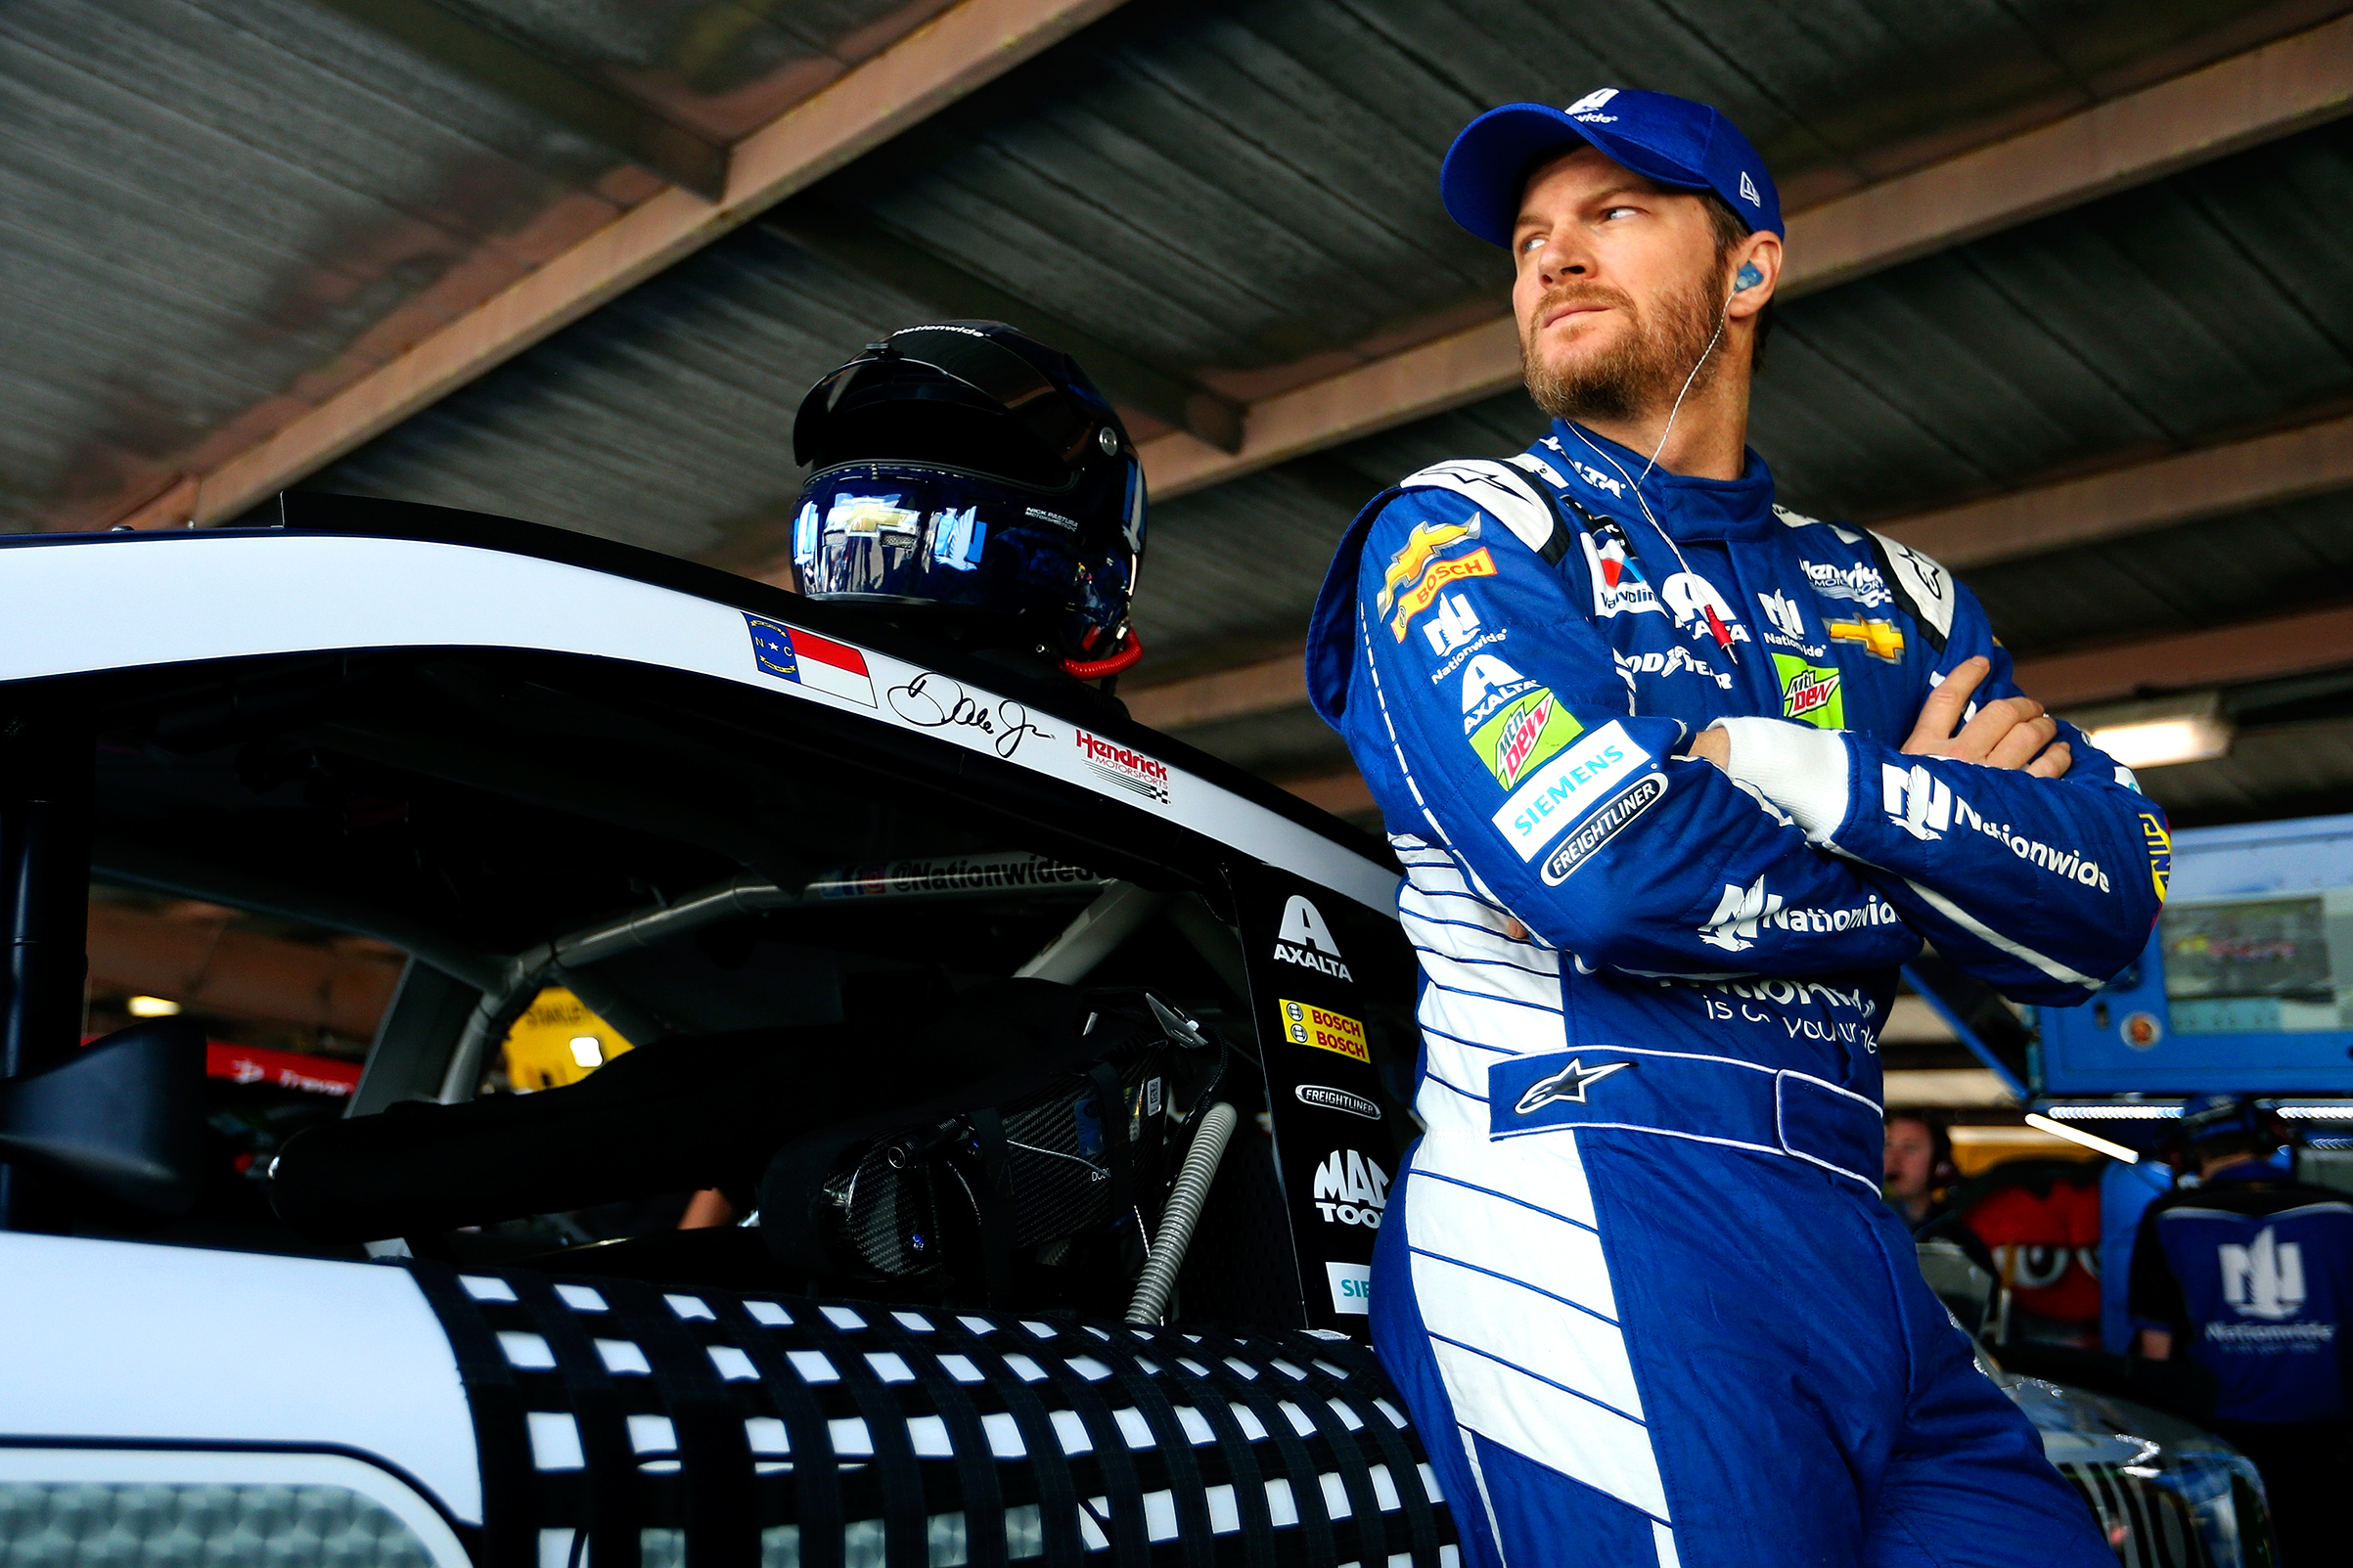 Fans have voted Earnhardt the most popular driver in NASCAR for 14 straight years (Sean Gardner—Getty Images)